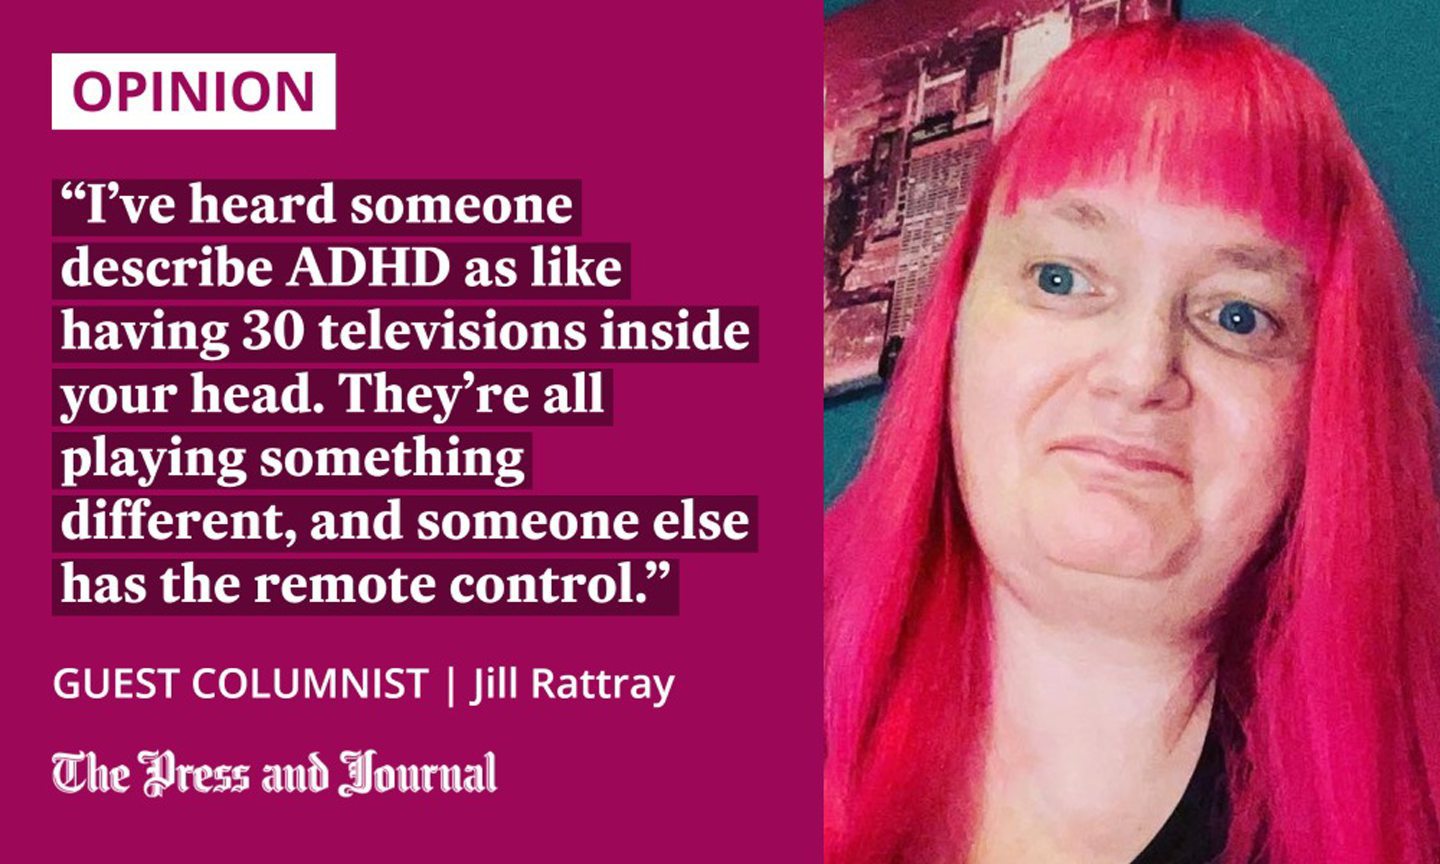 Quotation from guest columnist Jill Rattray: 'I've heard someone describe ADHD as like having 30 televisions inside your head. They're all playing something different, and someone else has the remote control.'